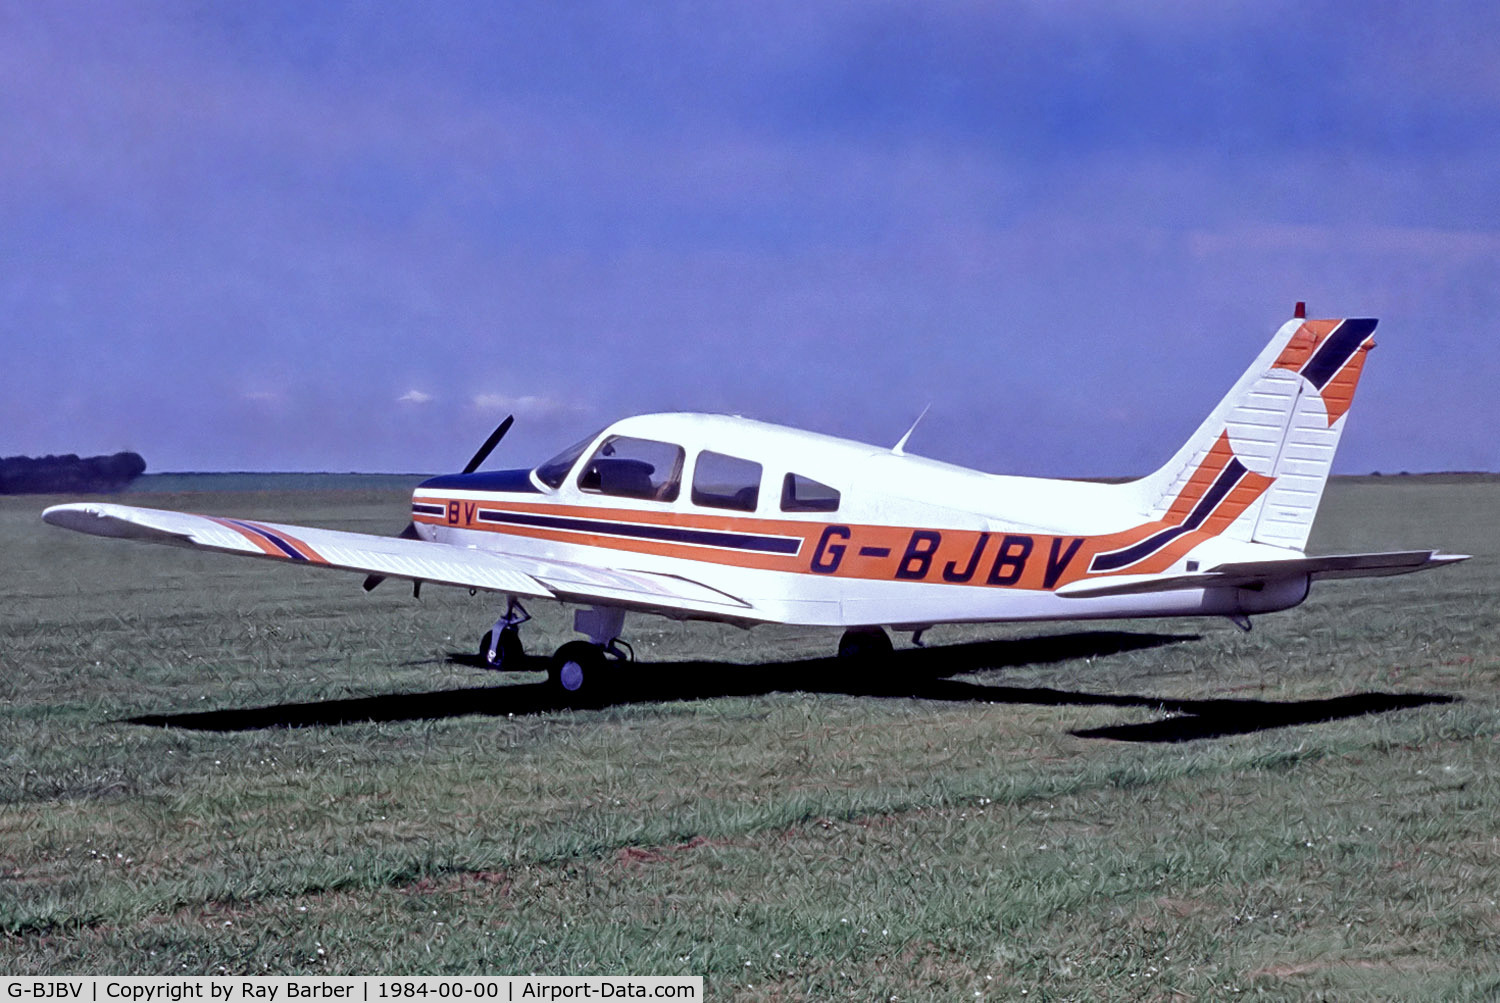 G-BJBV, 1981 Piper PA-28-161 Cherokee Warrior II C/N 28-8116279, Piper PA-28-161 Warrior II [28-8116279] (Place and date unknown) @ 1984. From a slide. A rare image of this aircraft for the net.